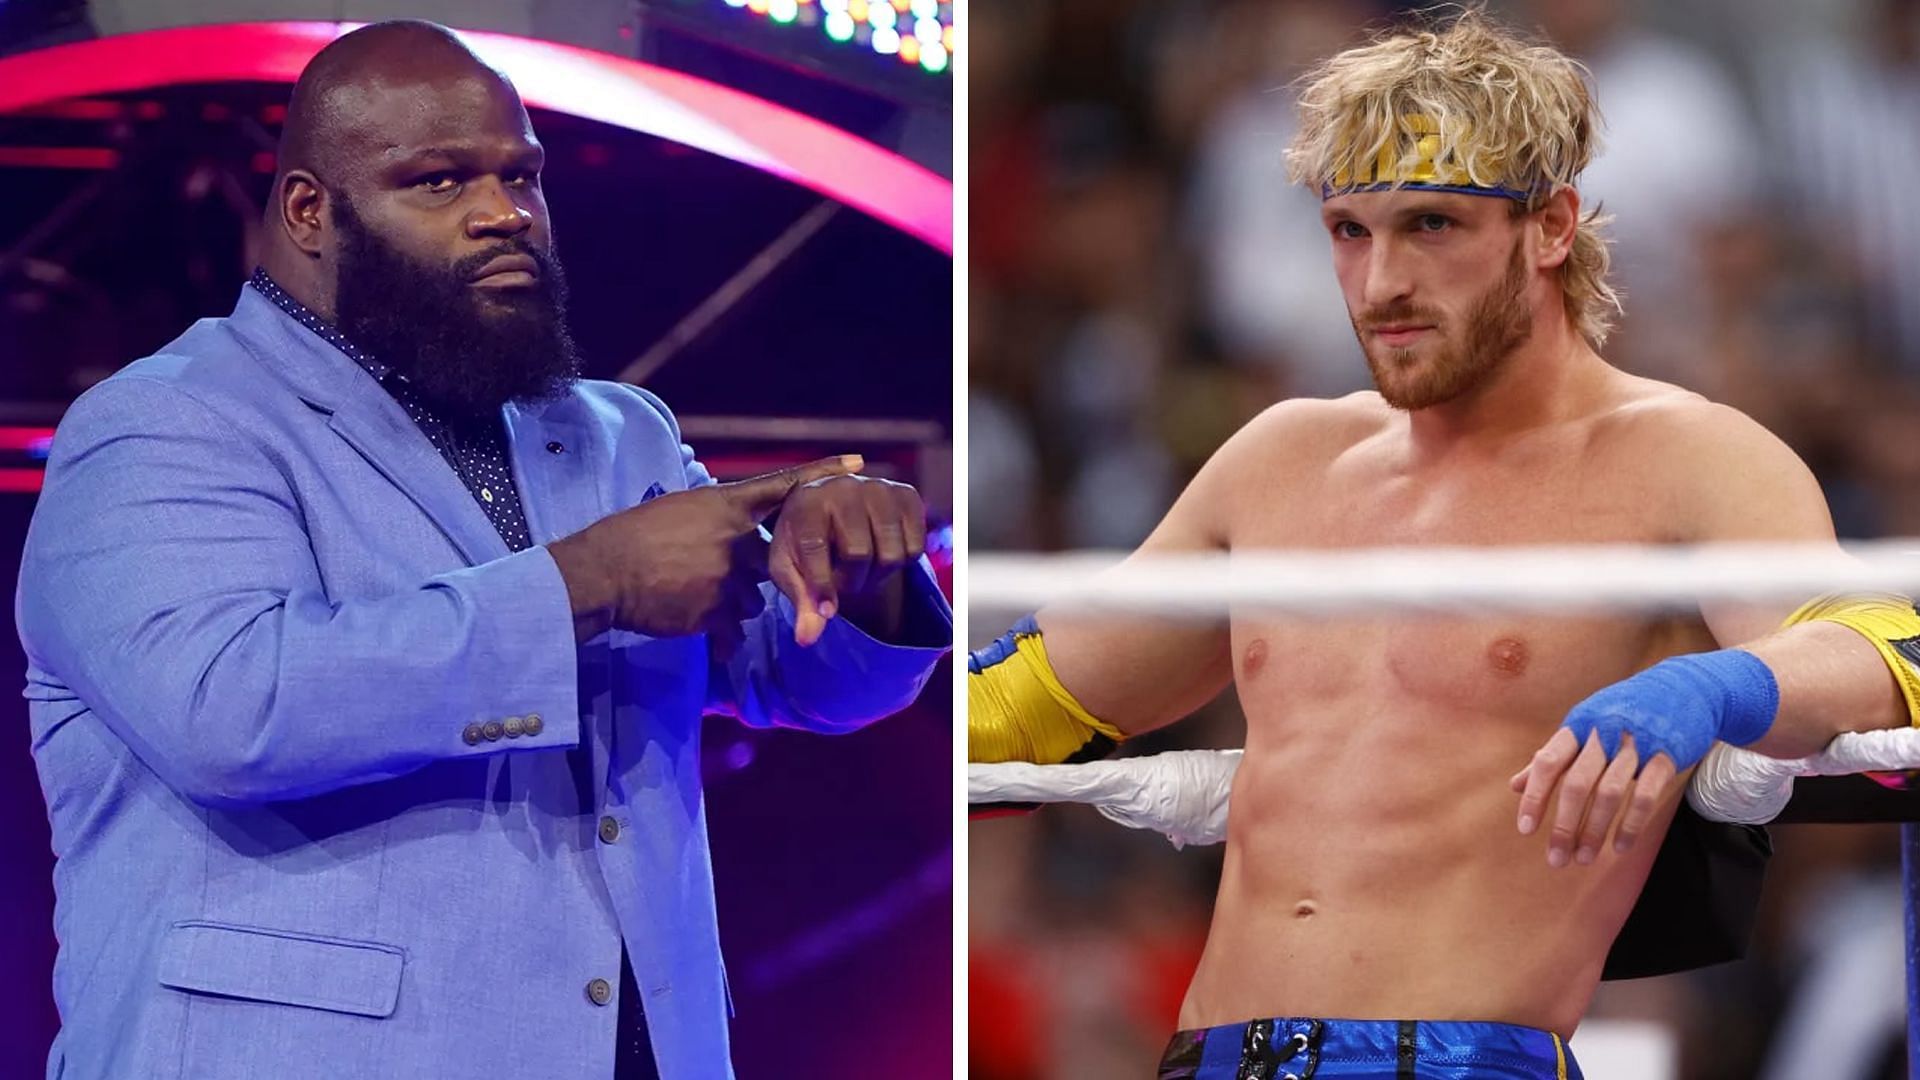 Mark Henry has some opinions to share on Logan Paul